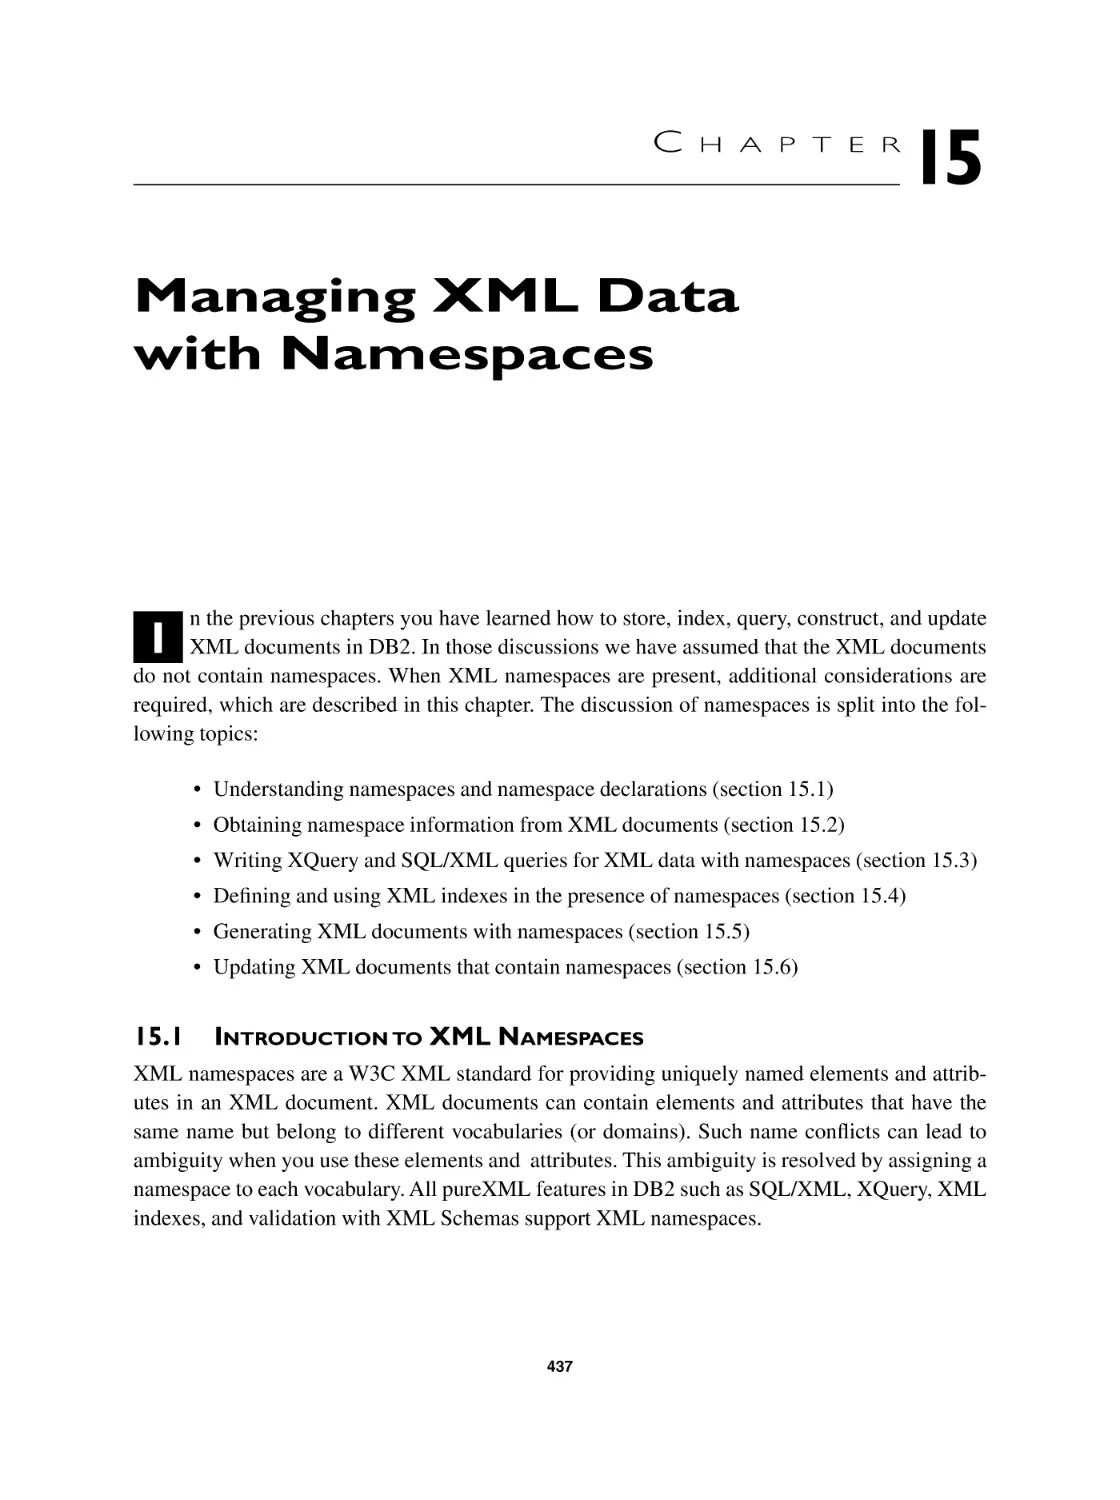 Chapter 15 Managing XML Data with Namespaces
15.1 Introduction to XML Namespaces